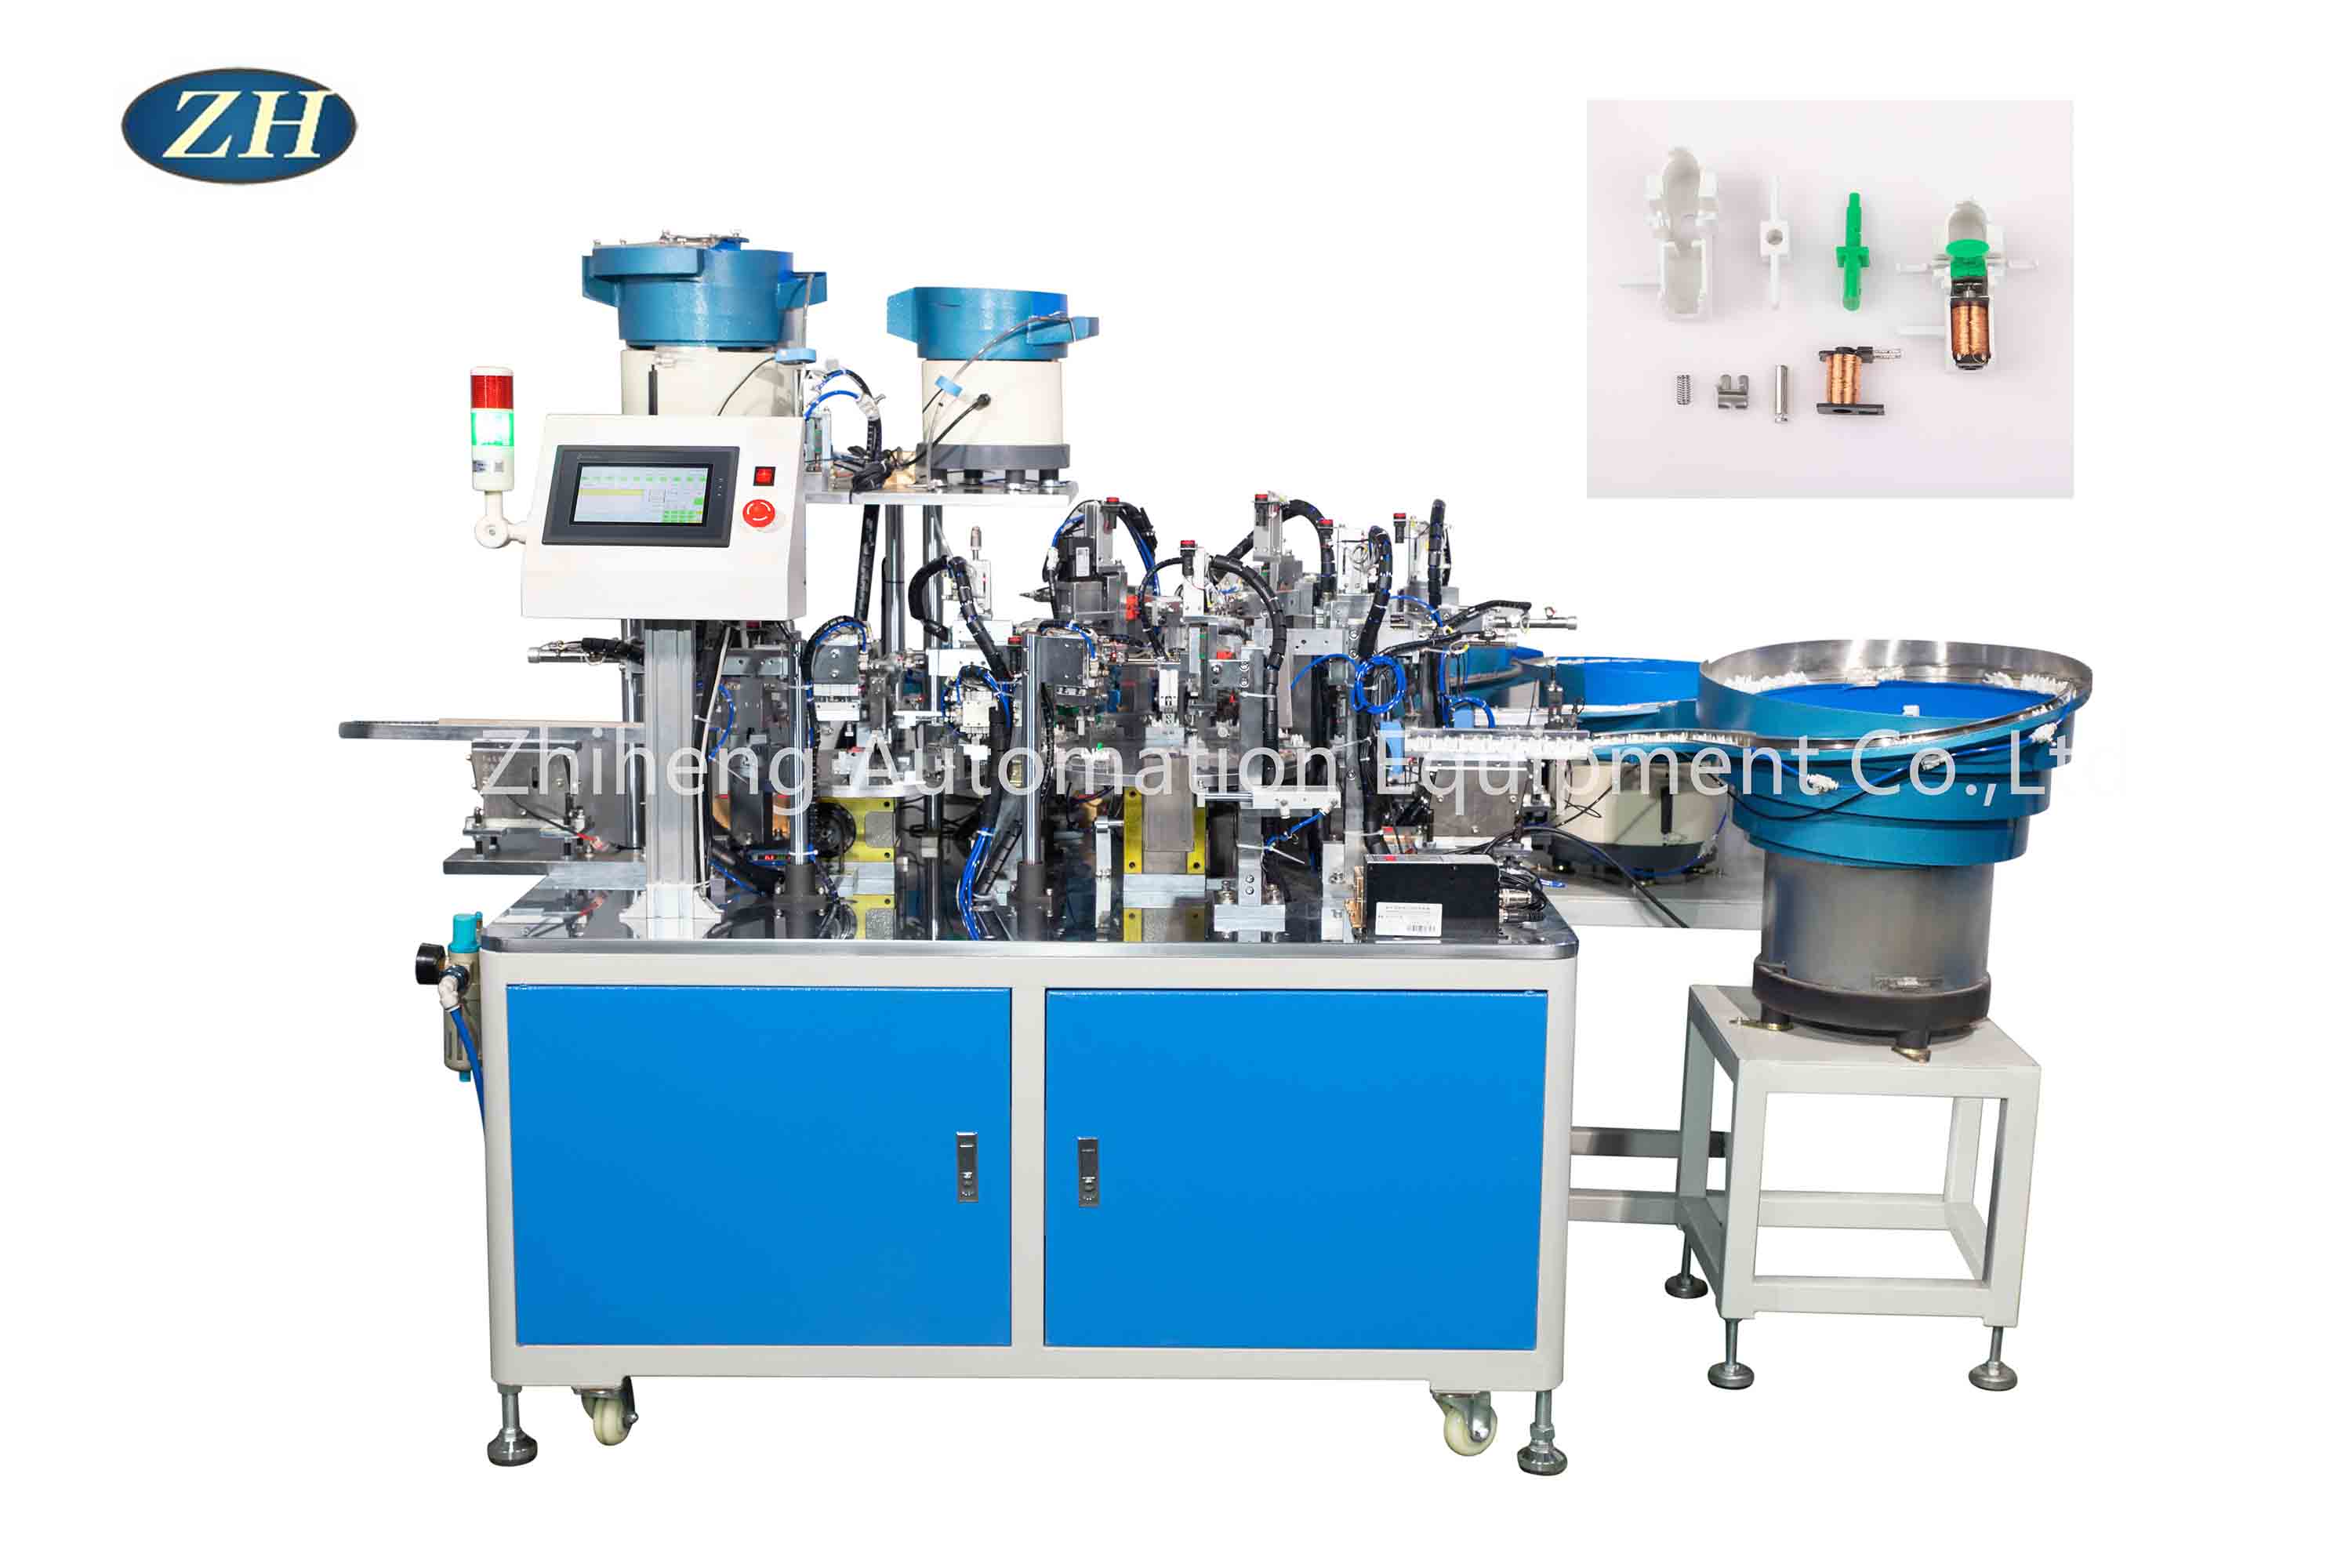 Automatic Assembly Machine for Relay